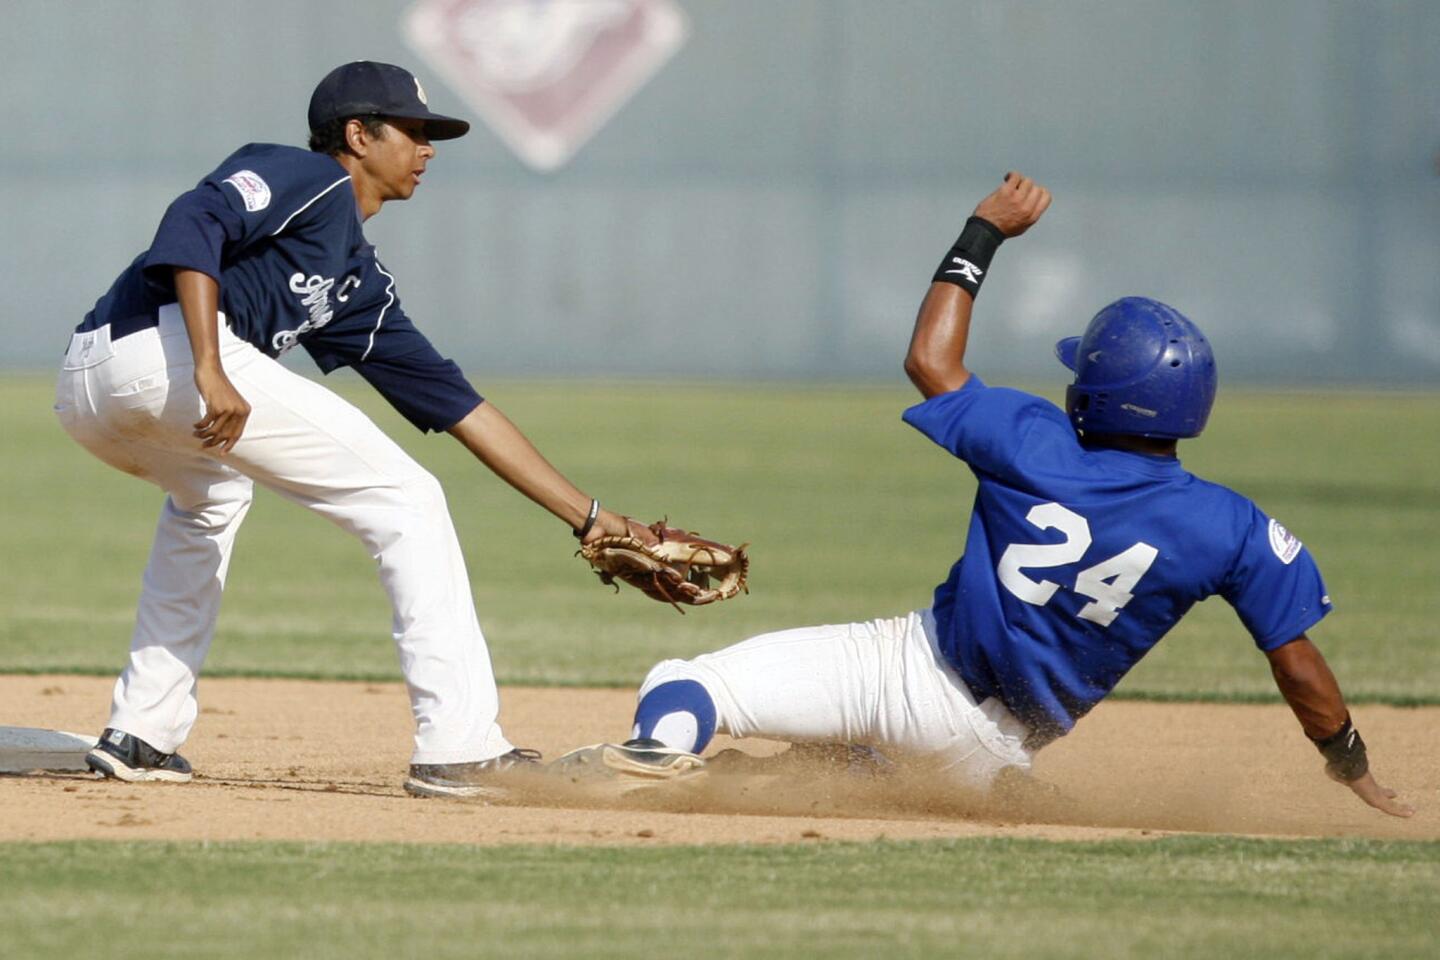 Arroyo Seco's Brandon Van Horn gets the other team out at second base during a game against Puerto Rico, which took place at Major League Baseball Urban Youth Academy in Compton on Thursday, August 3, 2012.